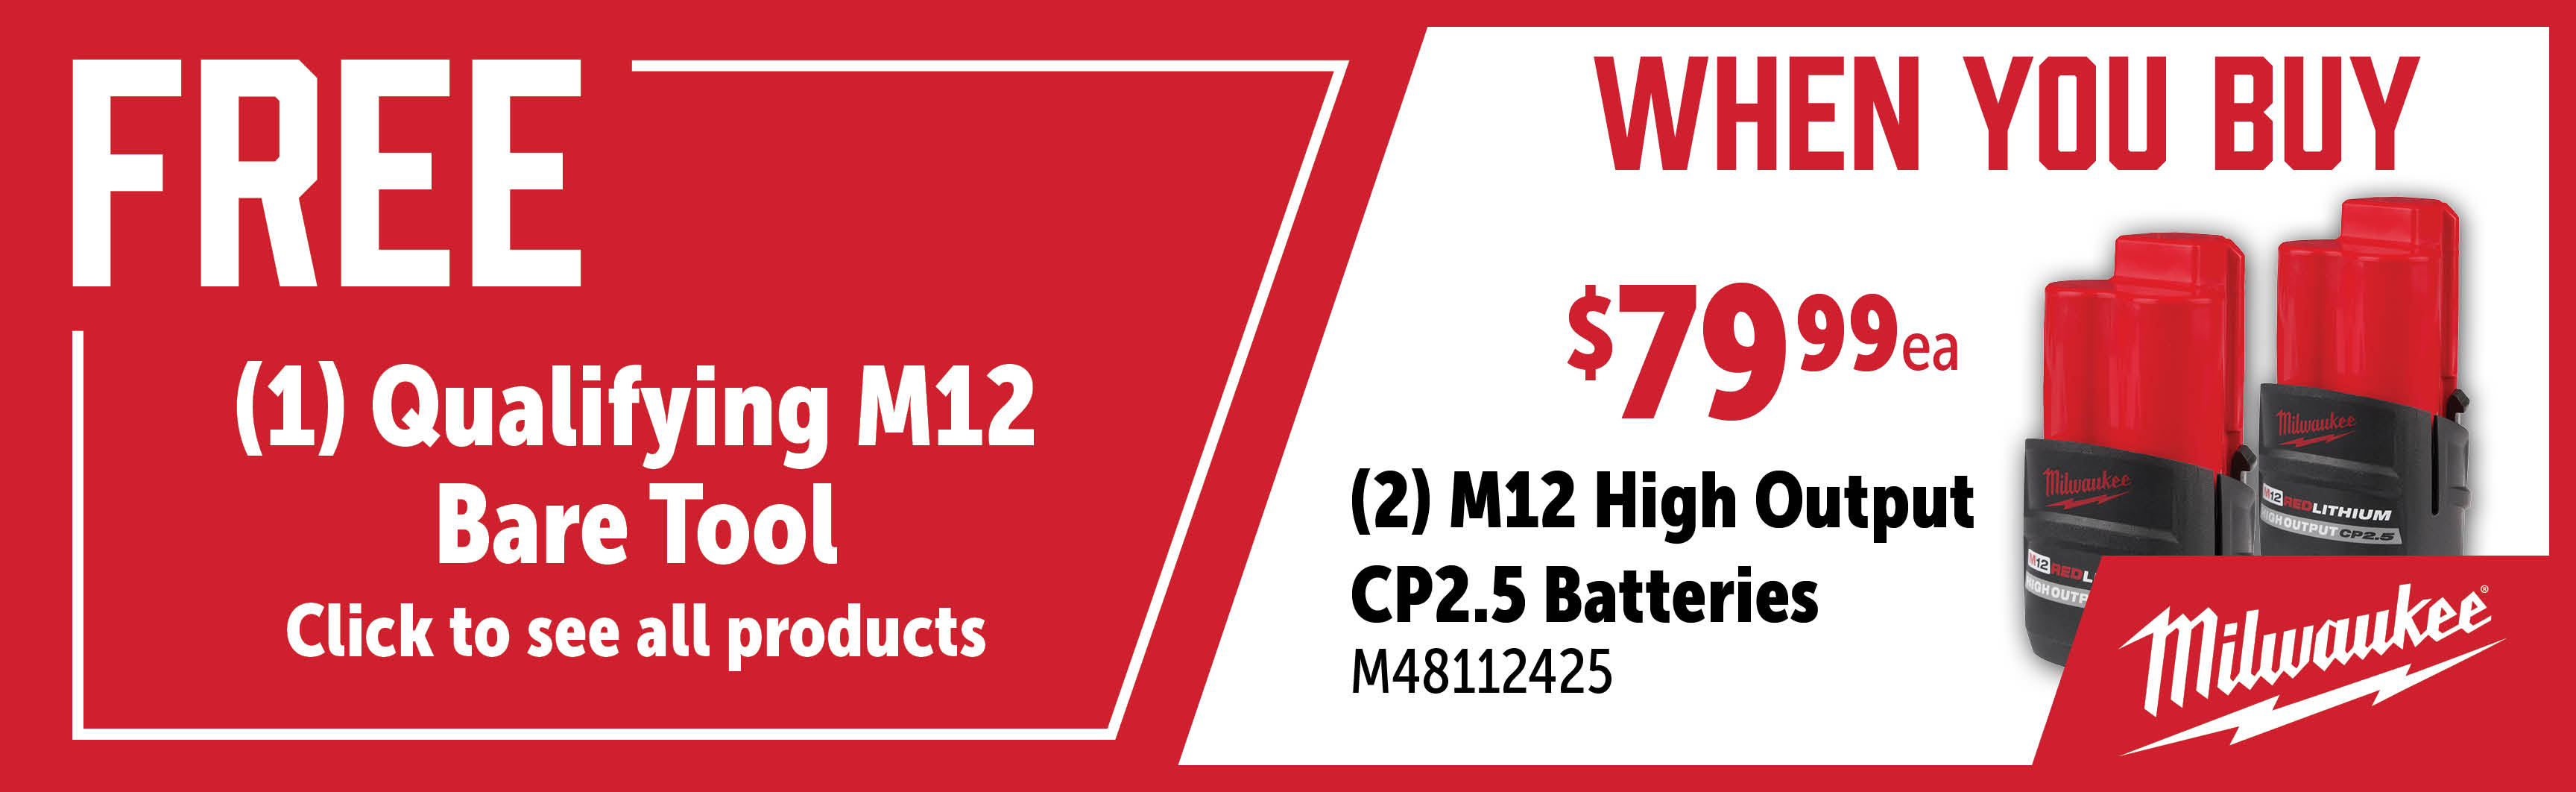 Milwaukee Aug-Oct: Buy Two M48112425 and Get a Qualifying M12 Free Bare Tool